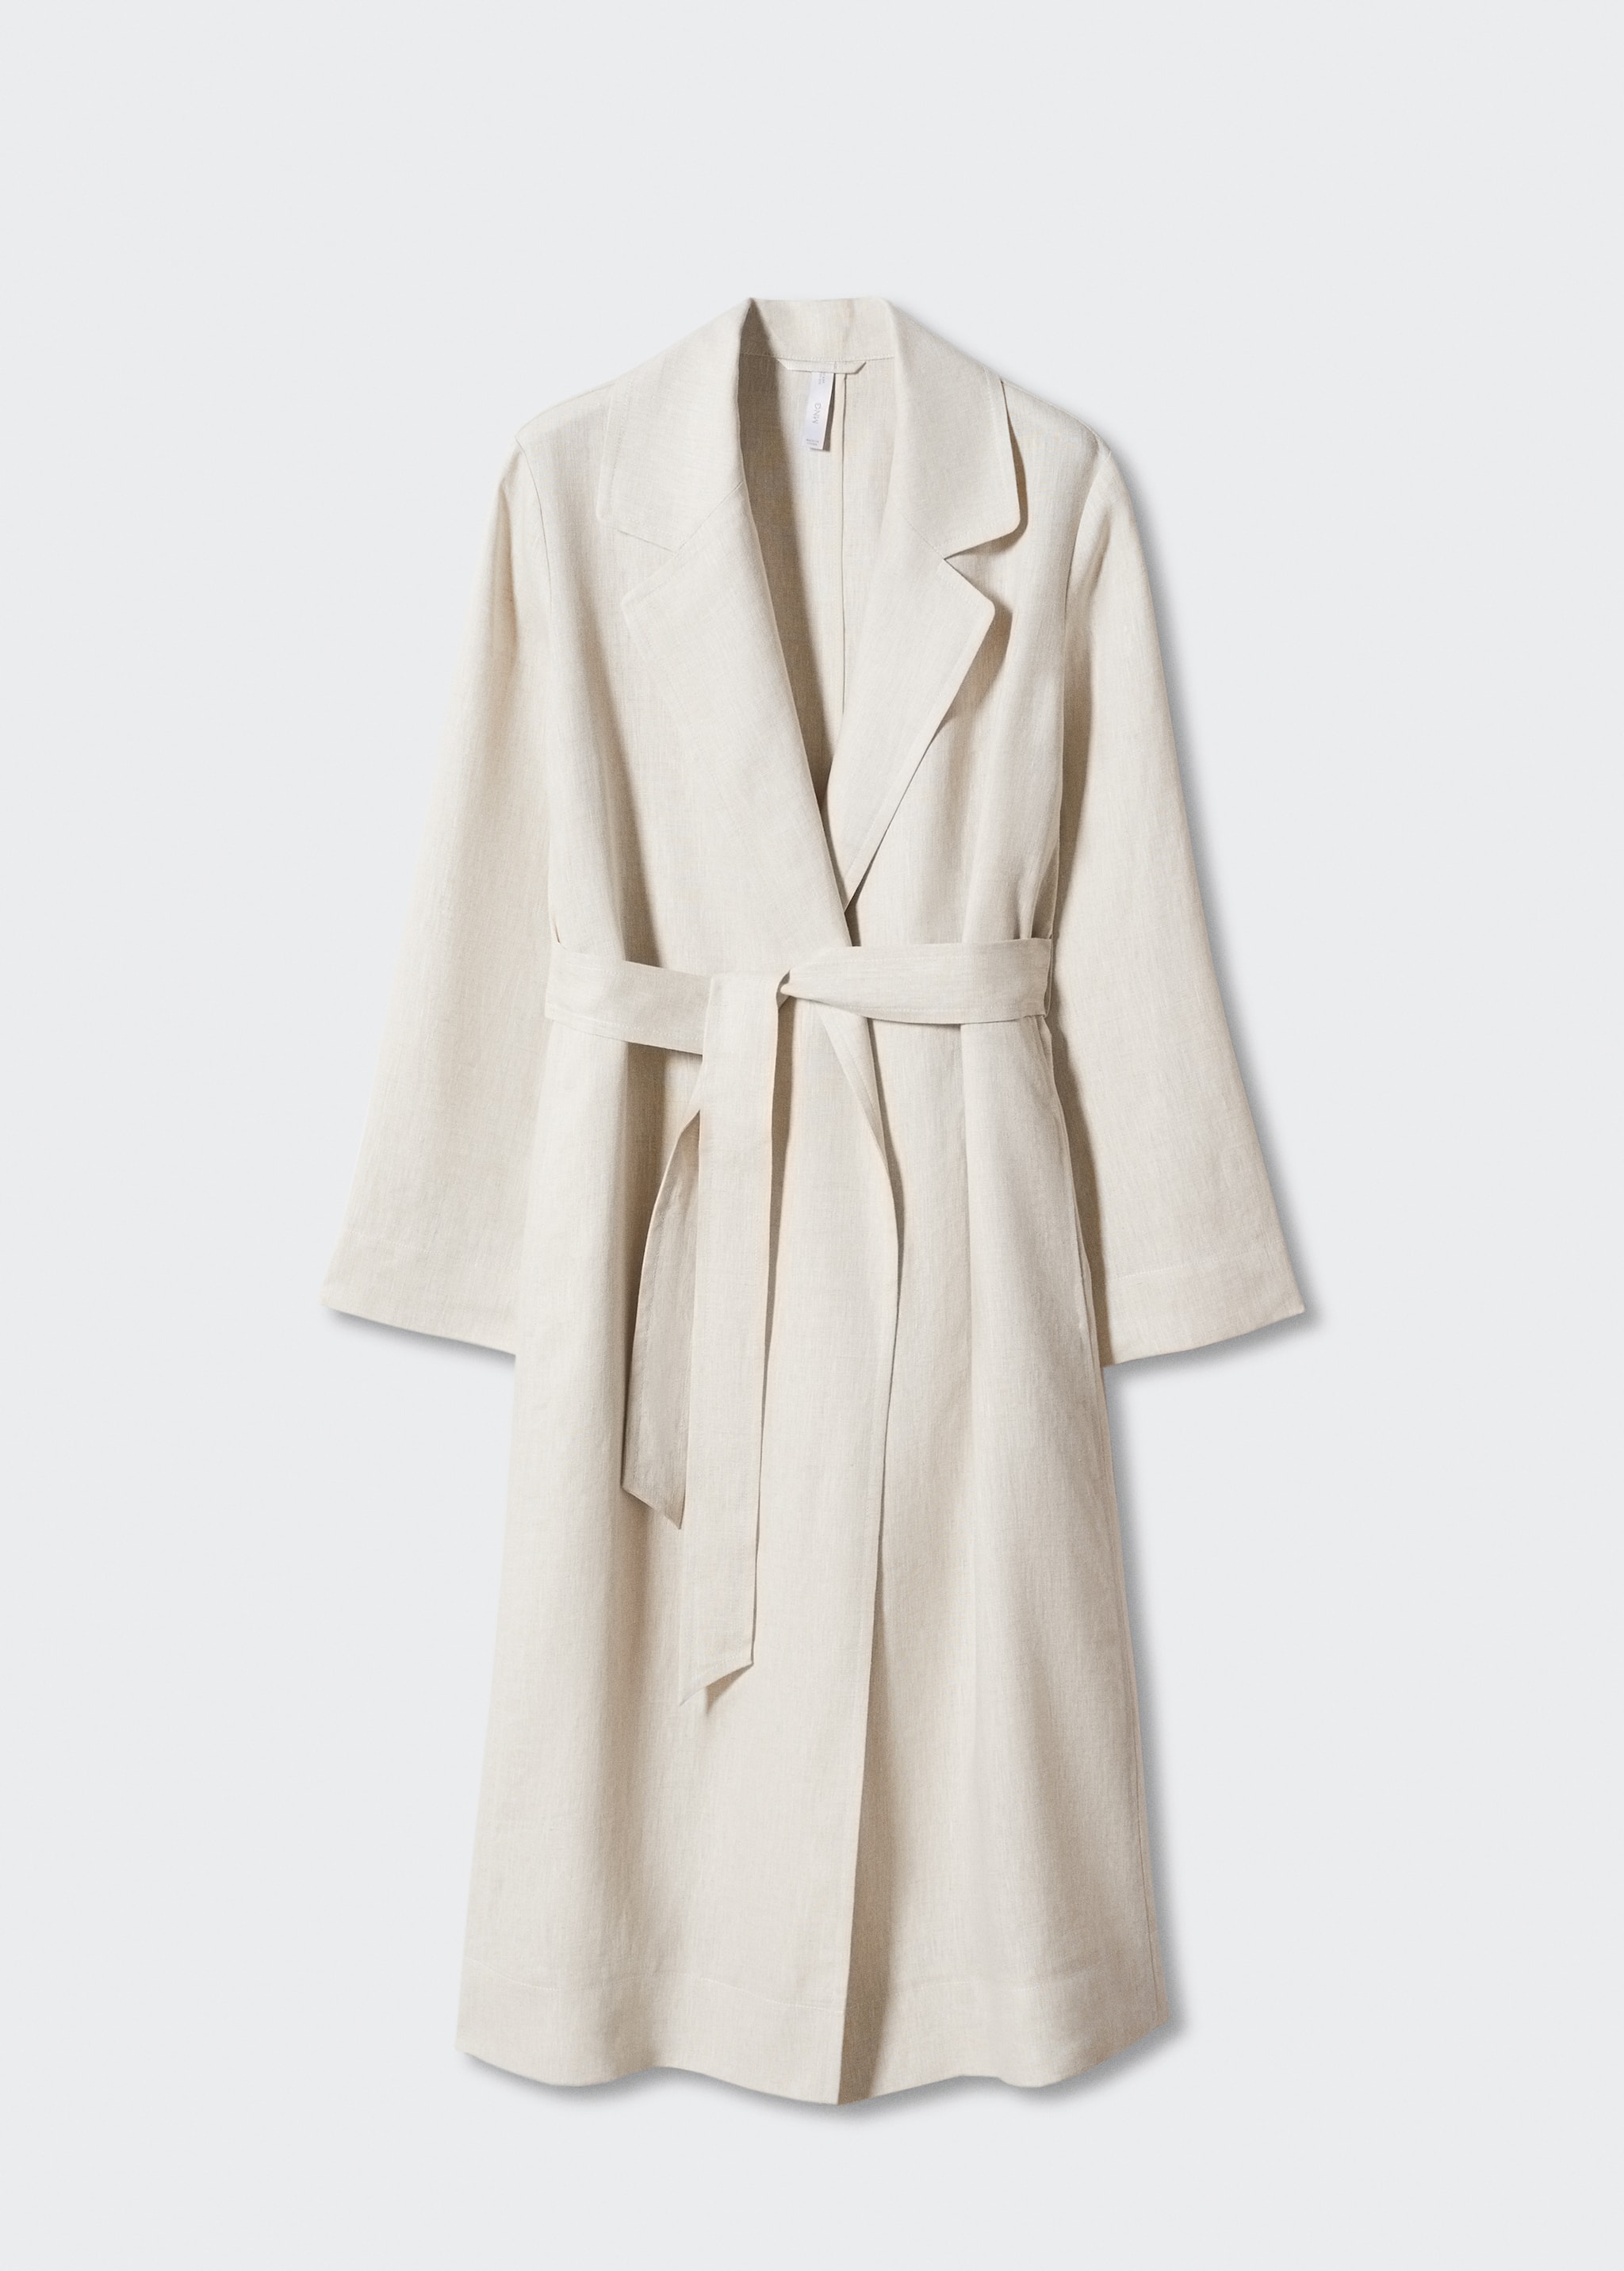 100% linen trench coat lapels - Article without model